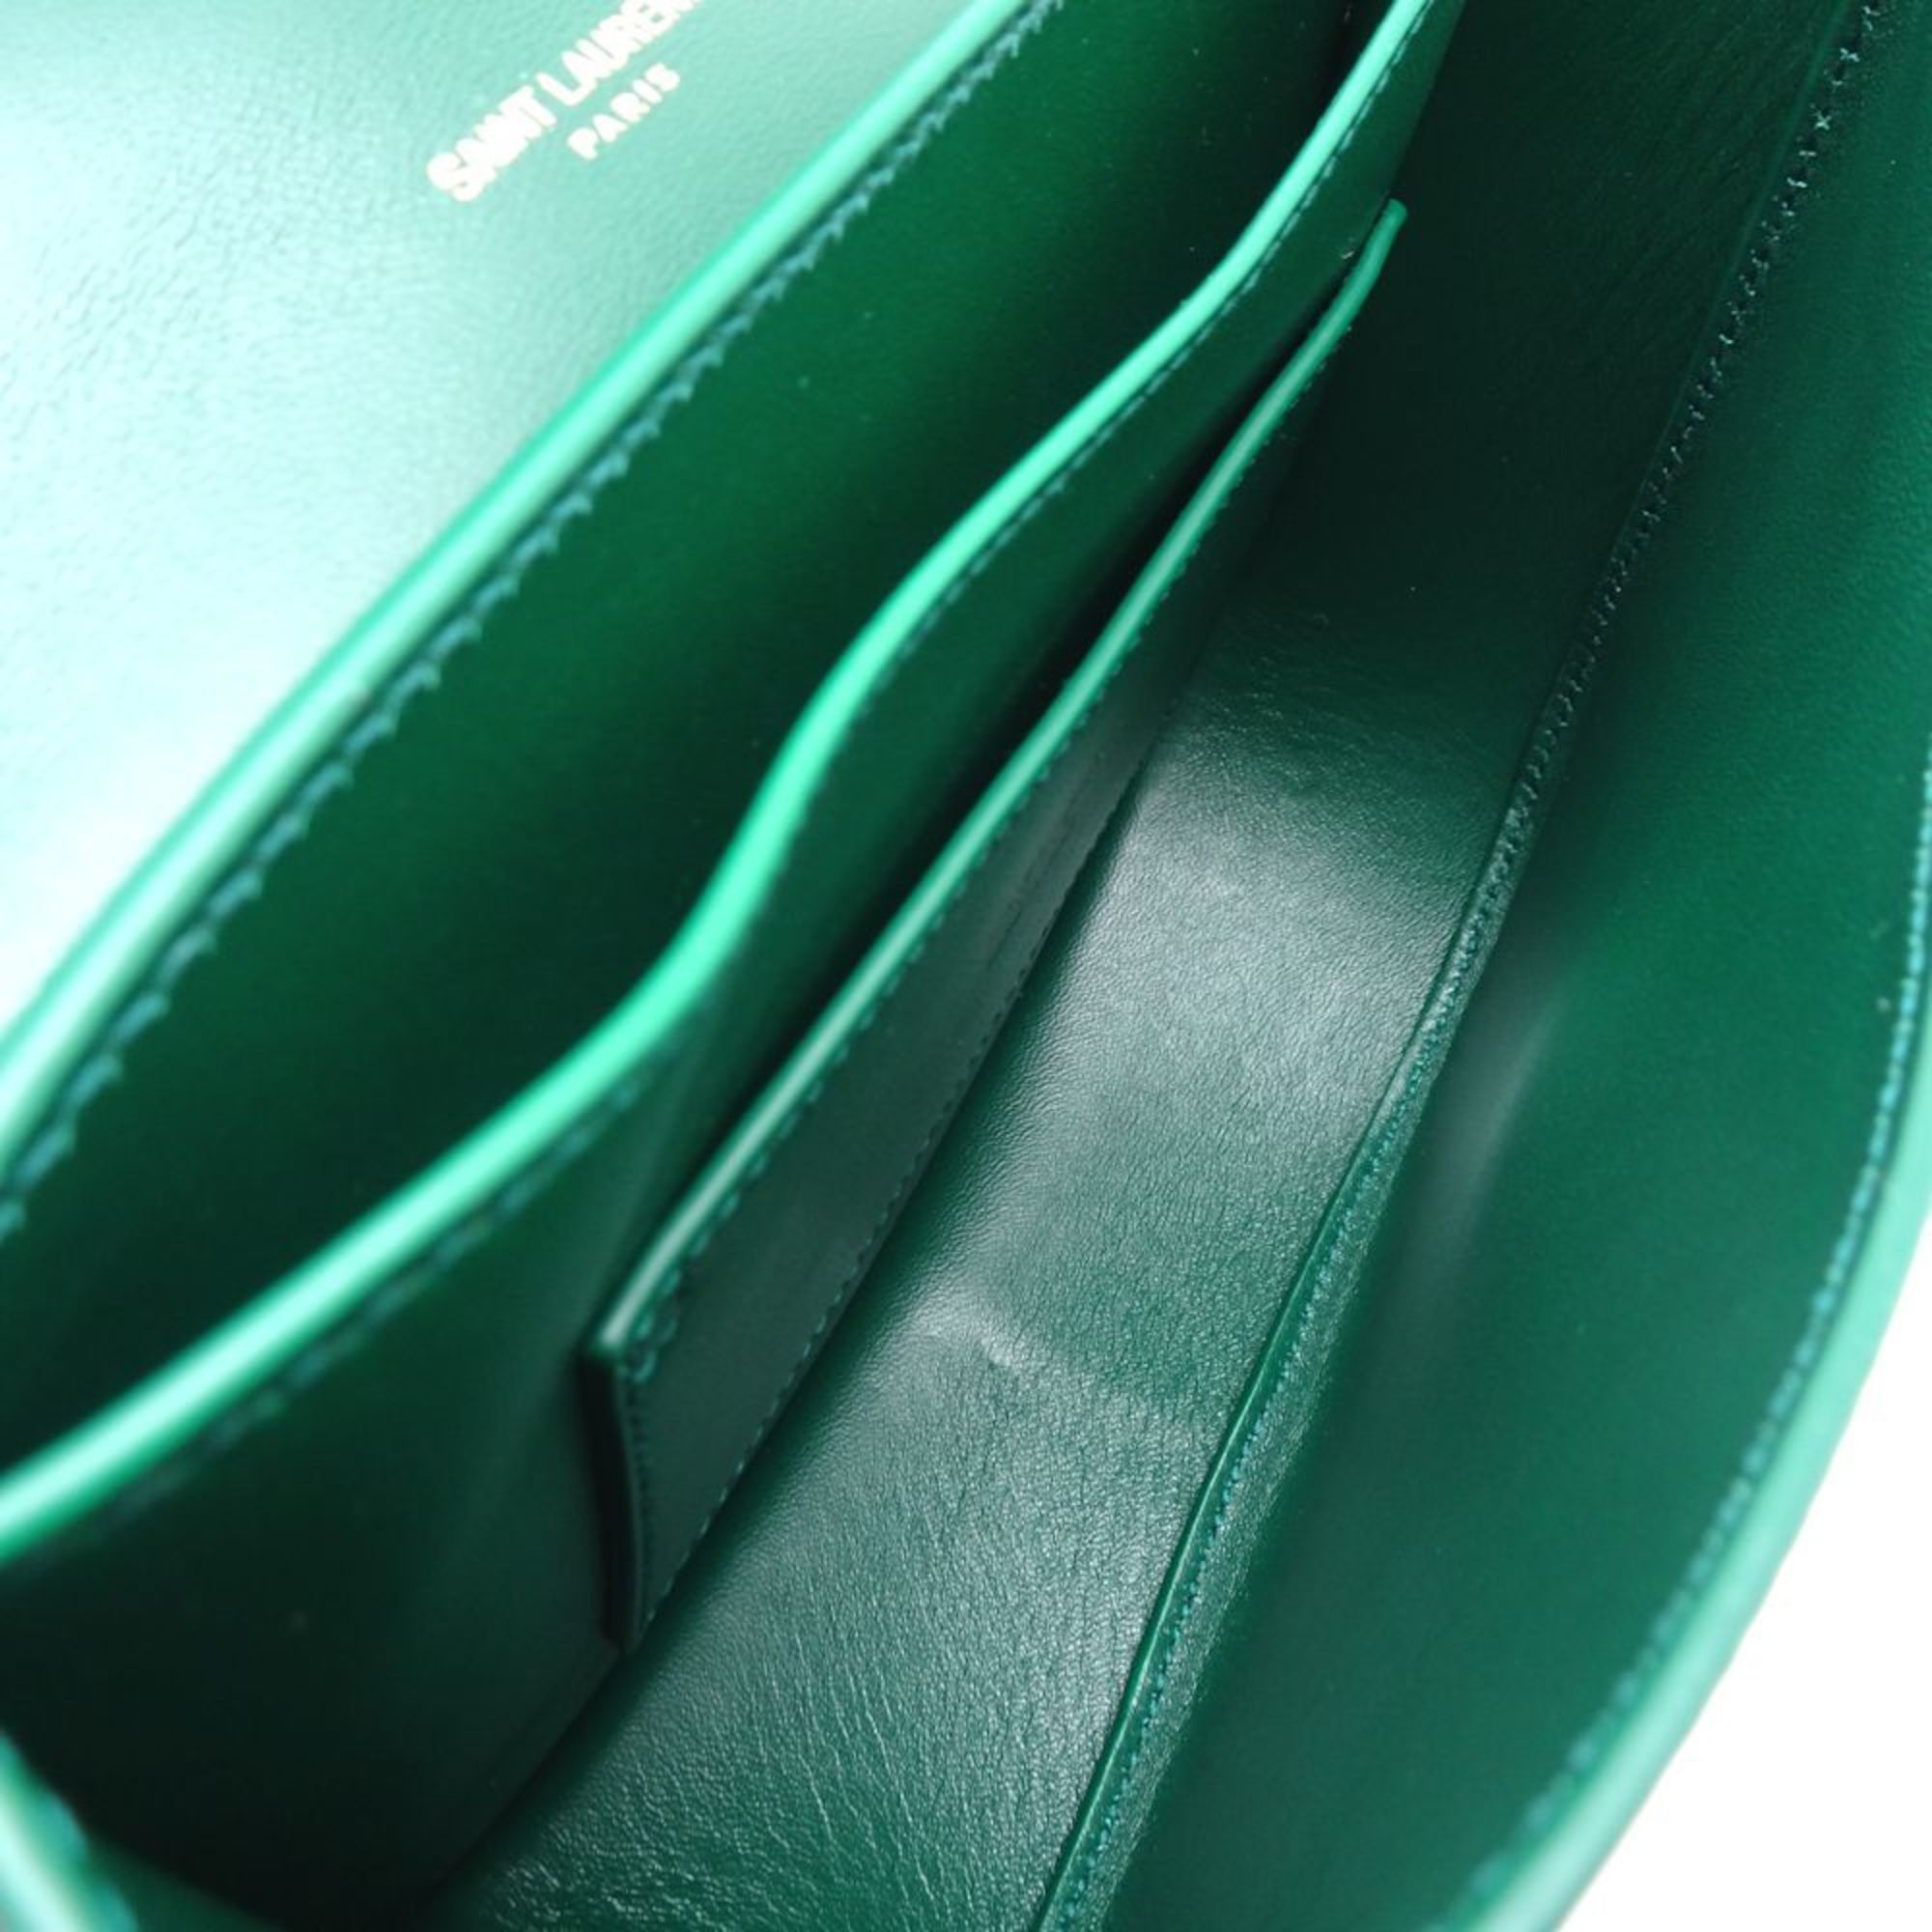 SAINT LAURENT Kaia 619740 Shoulder Bag Small Size Embossed Leather Green 351208